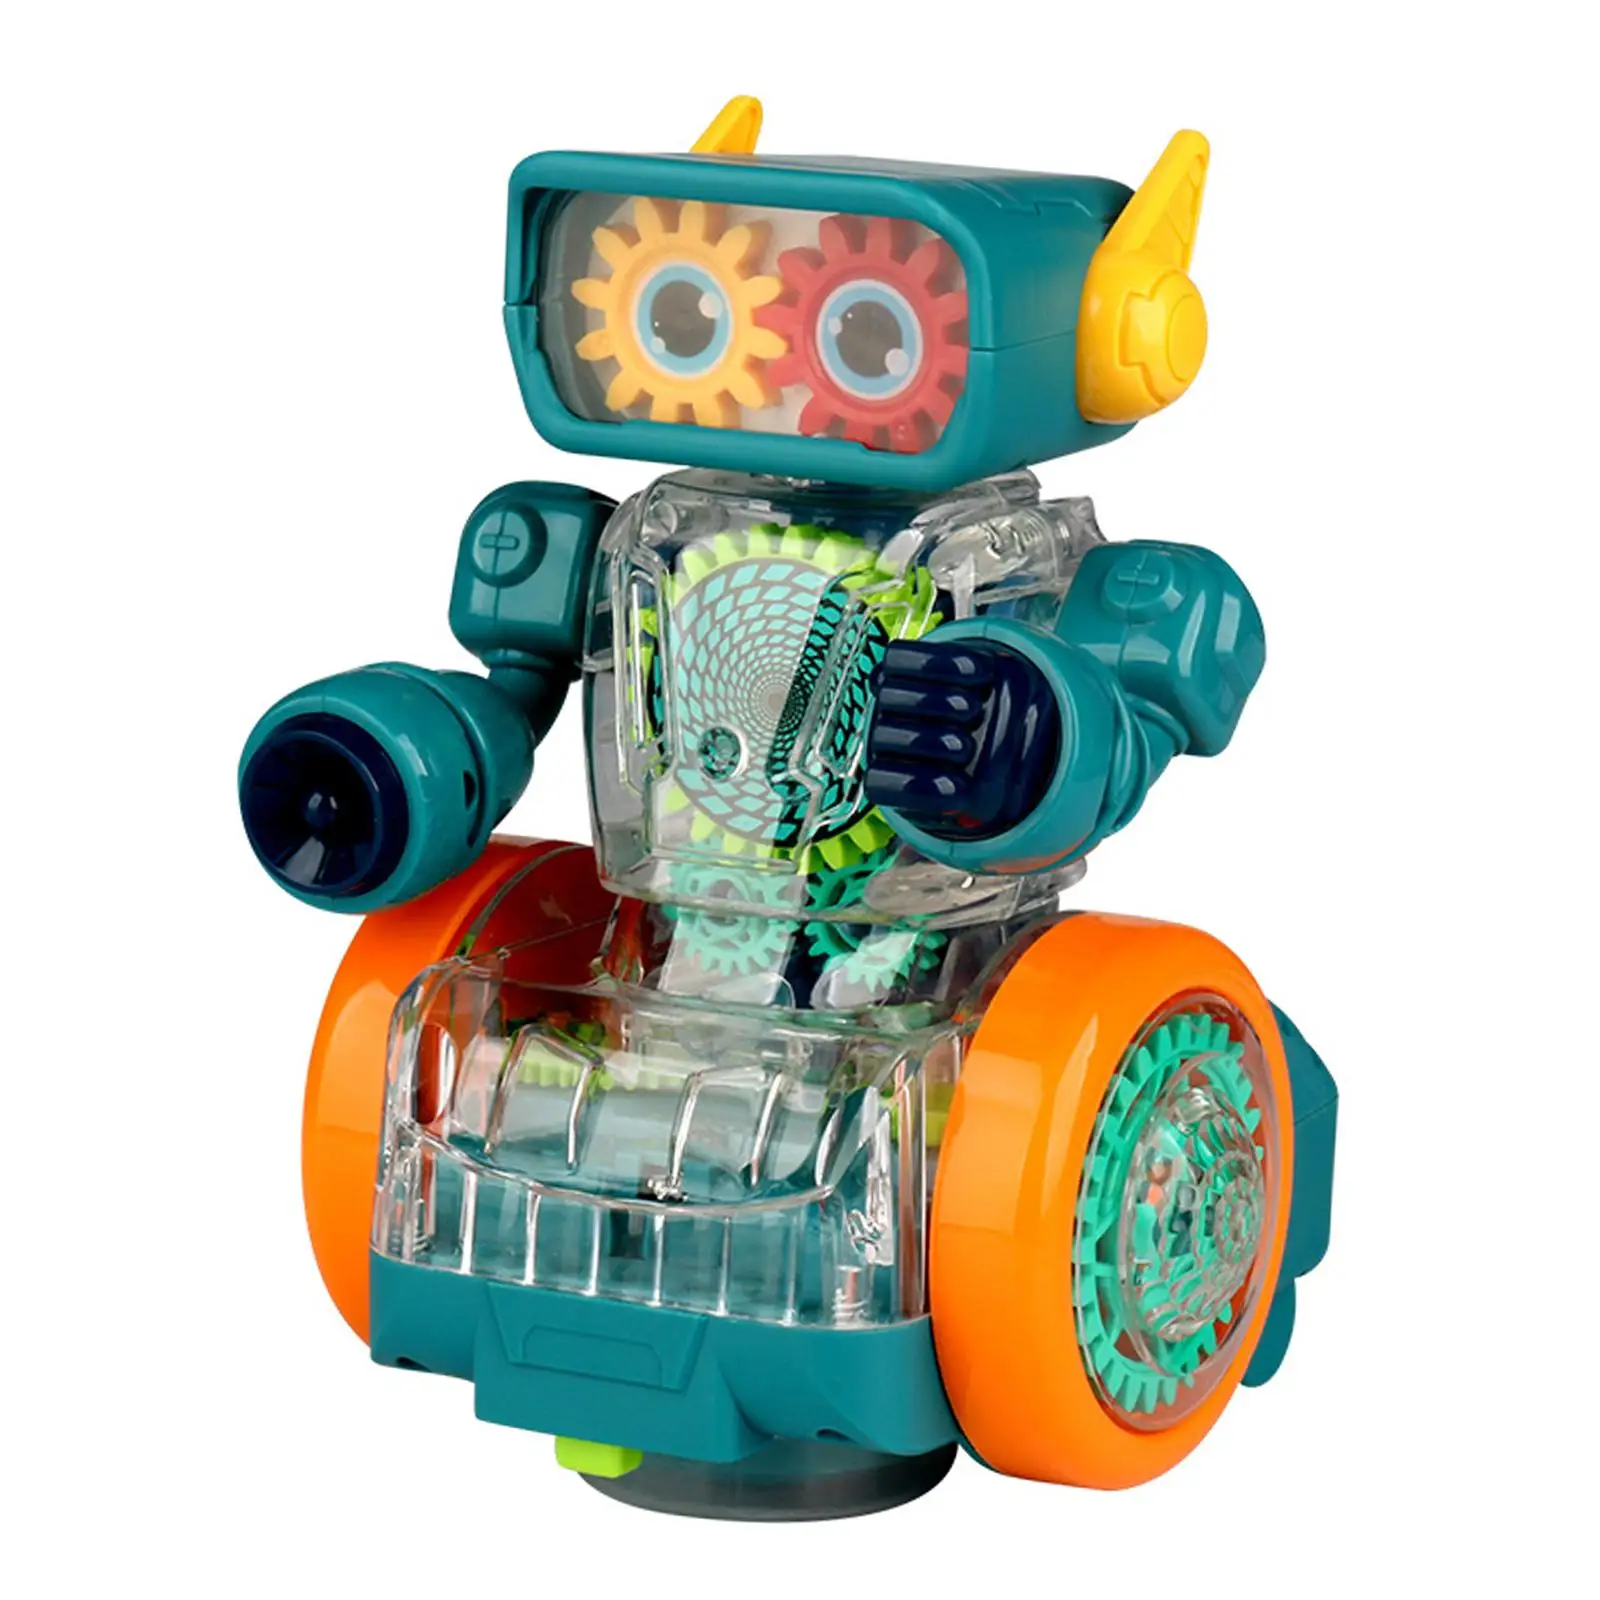 Mechanical Gear Robot Toy Early Educational Toys with Lights for Boys Kids